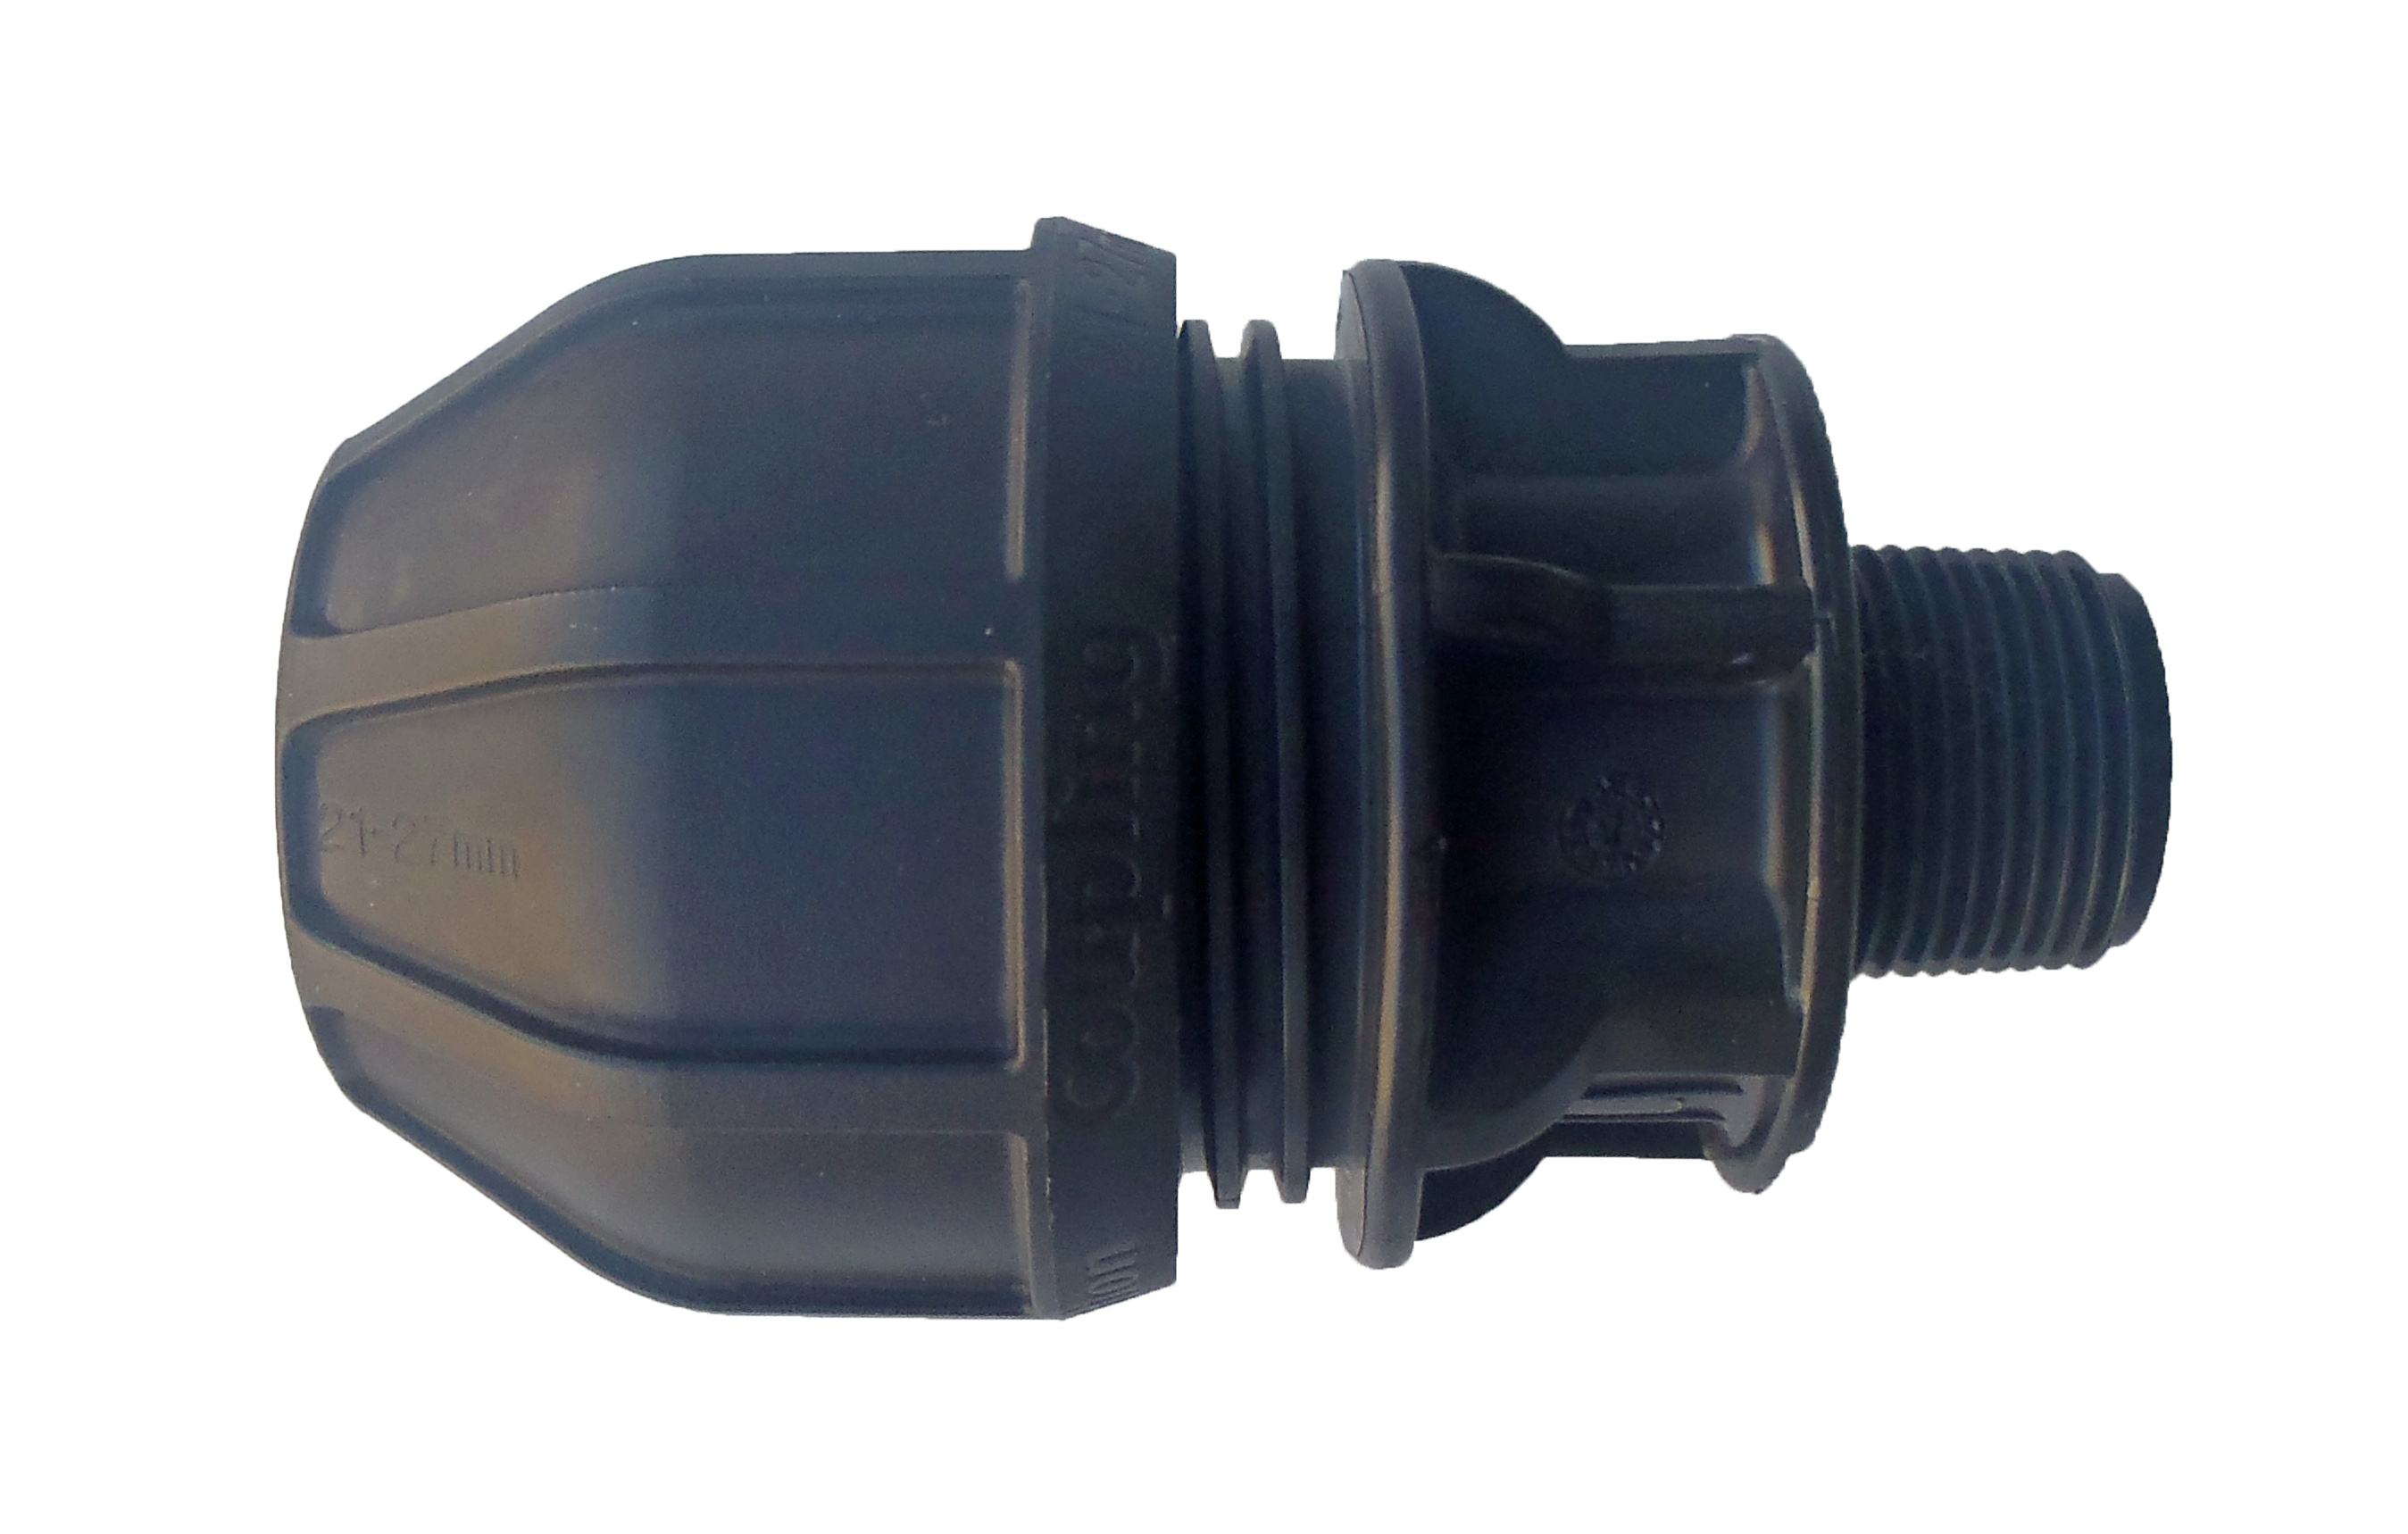 Philmac Universal Transition Coupling (UTC) by 3/4" Threaded Connection